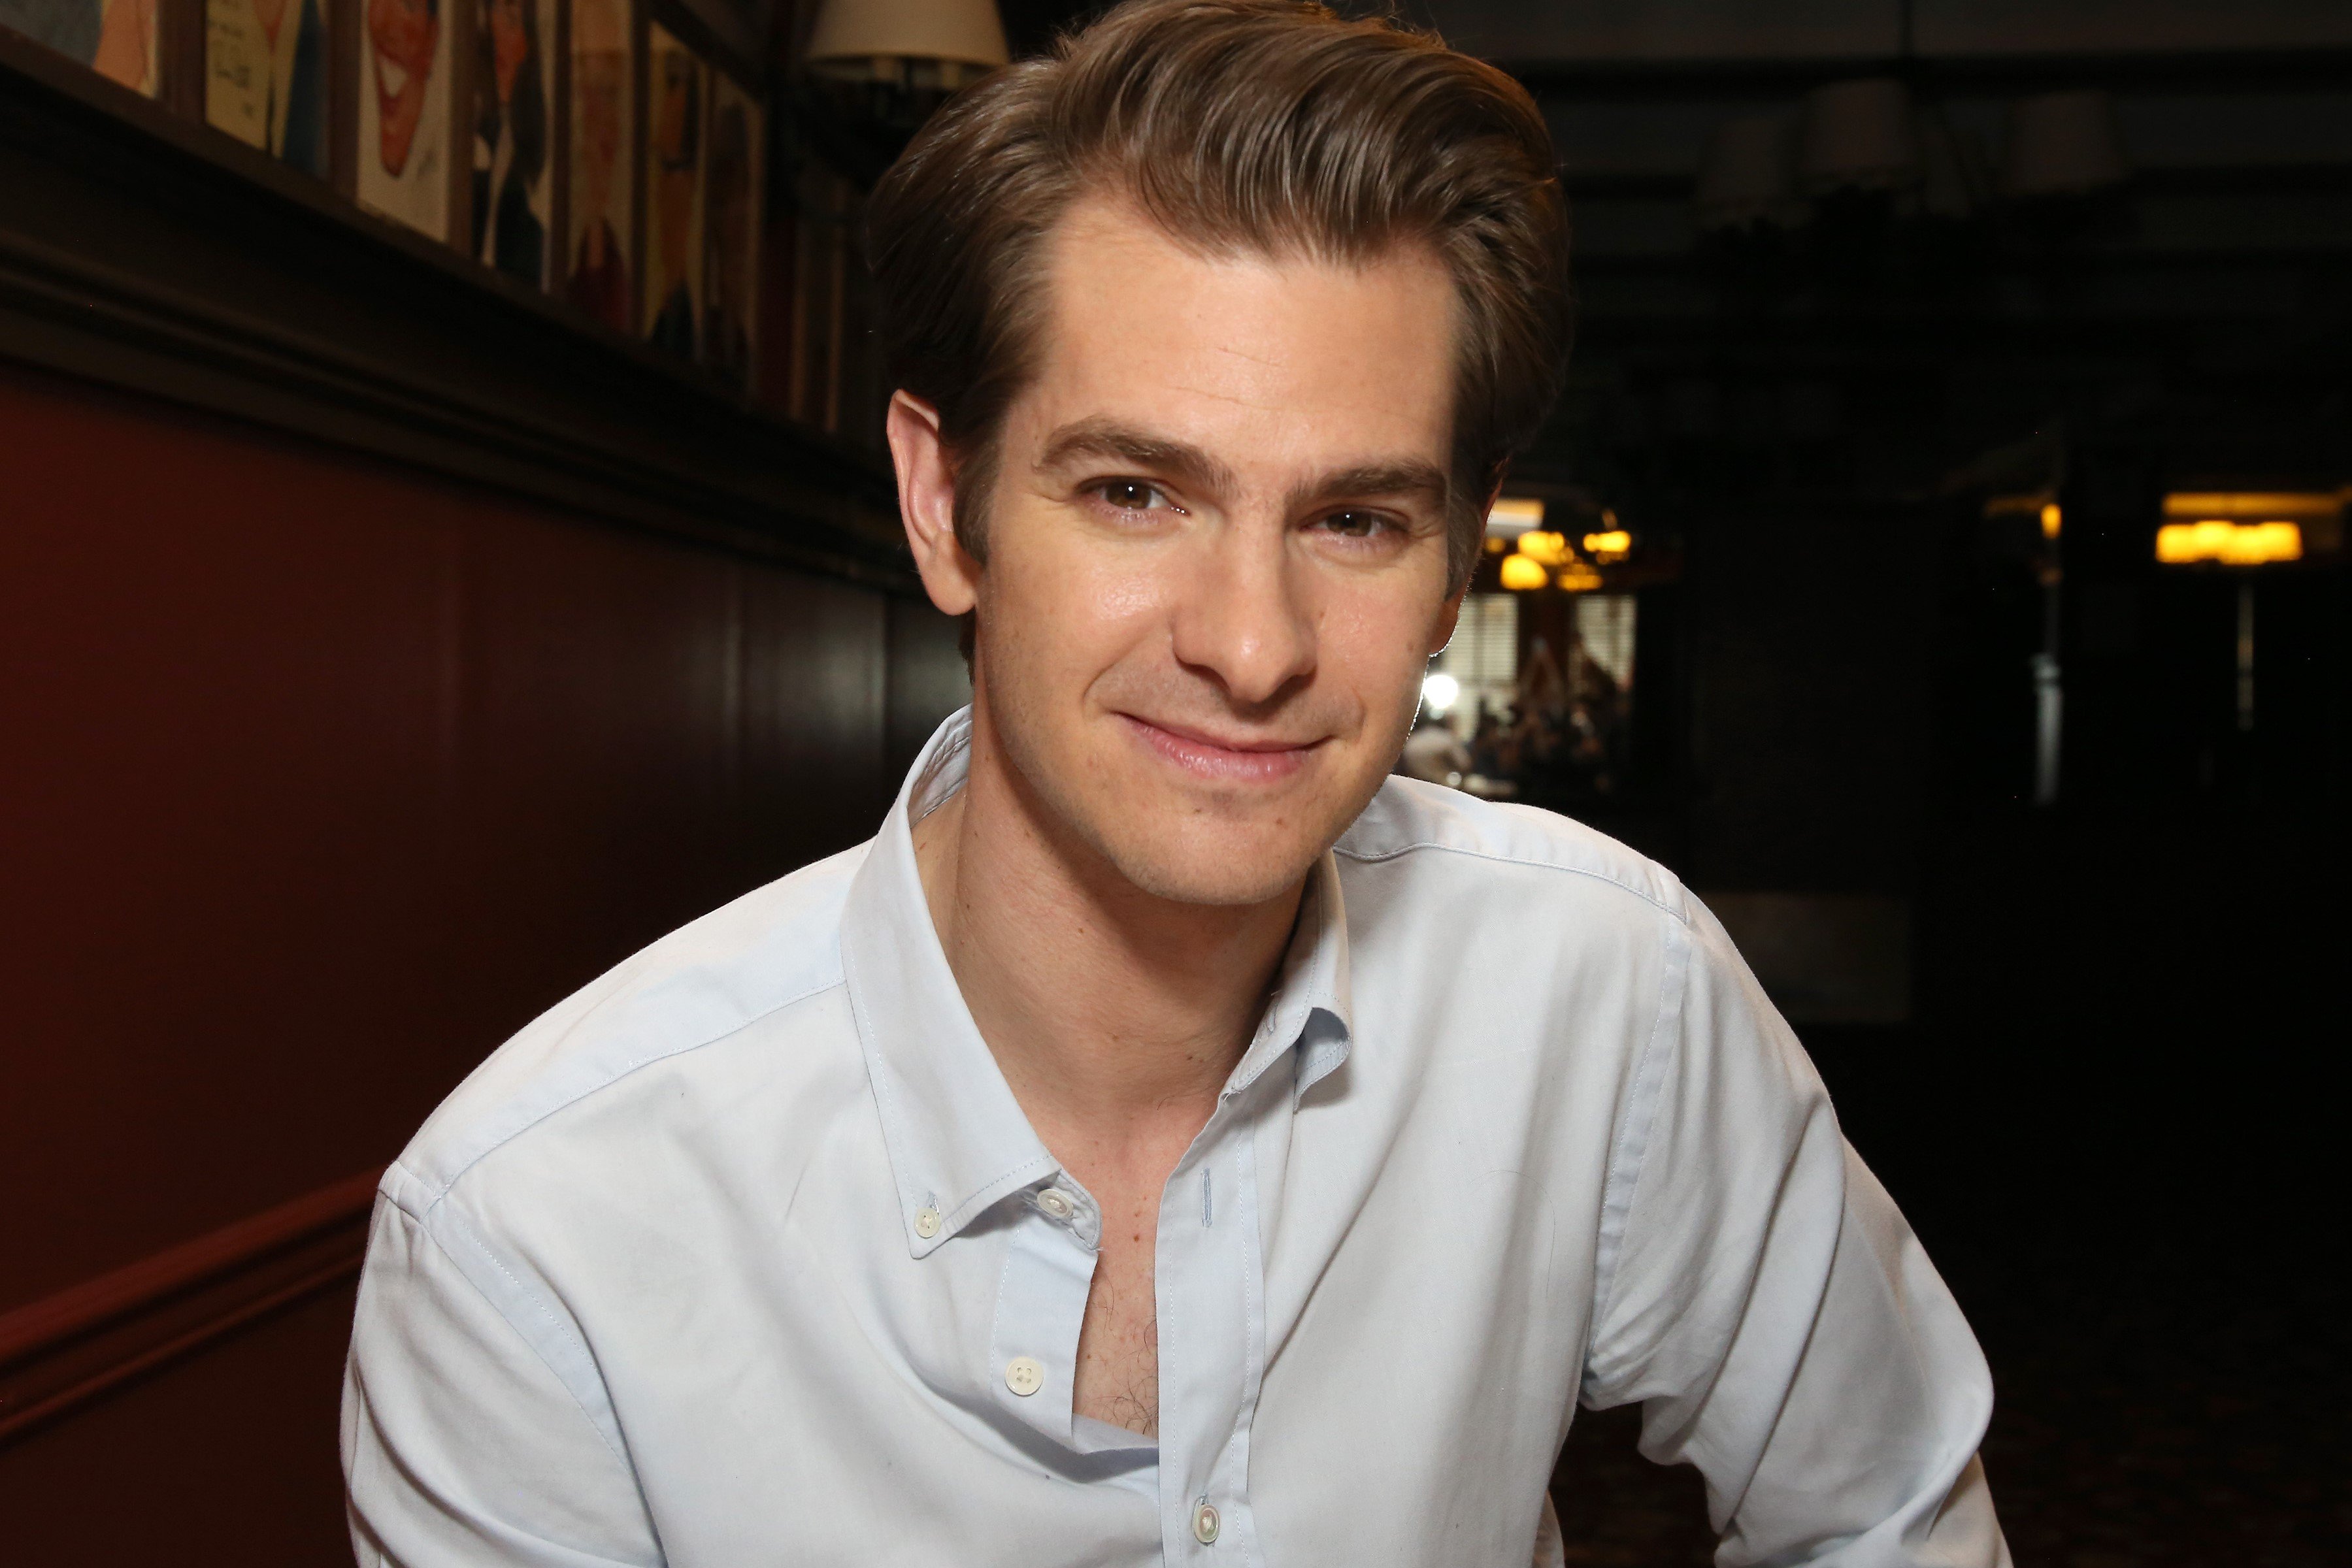 Andrew Garfield, in a white shirt, at an event in New York City in 2018.